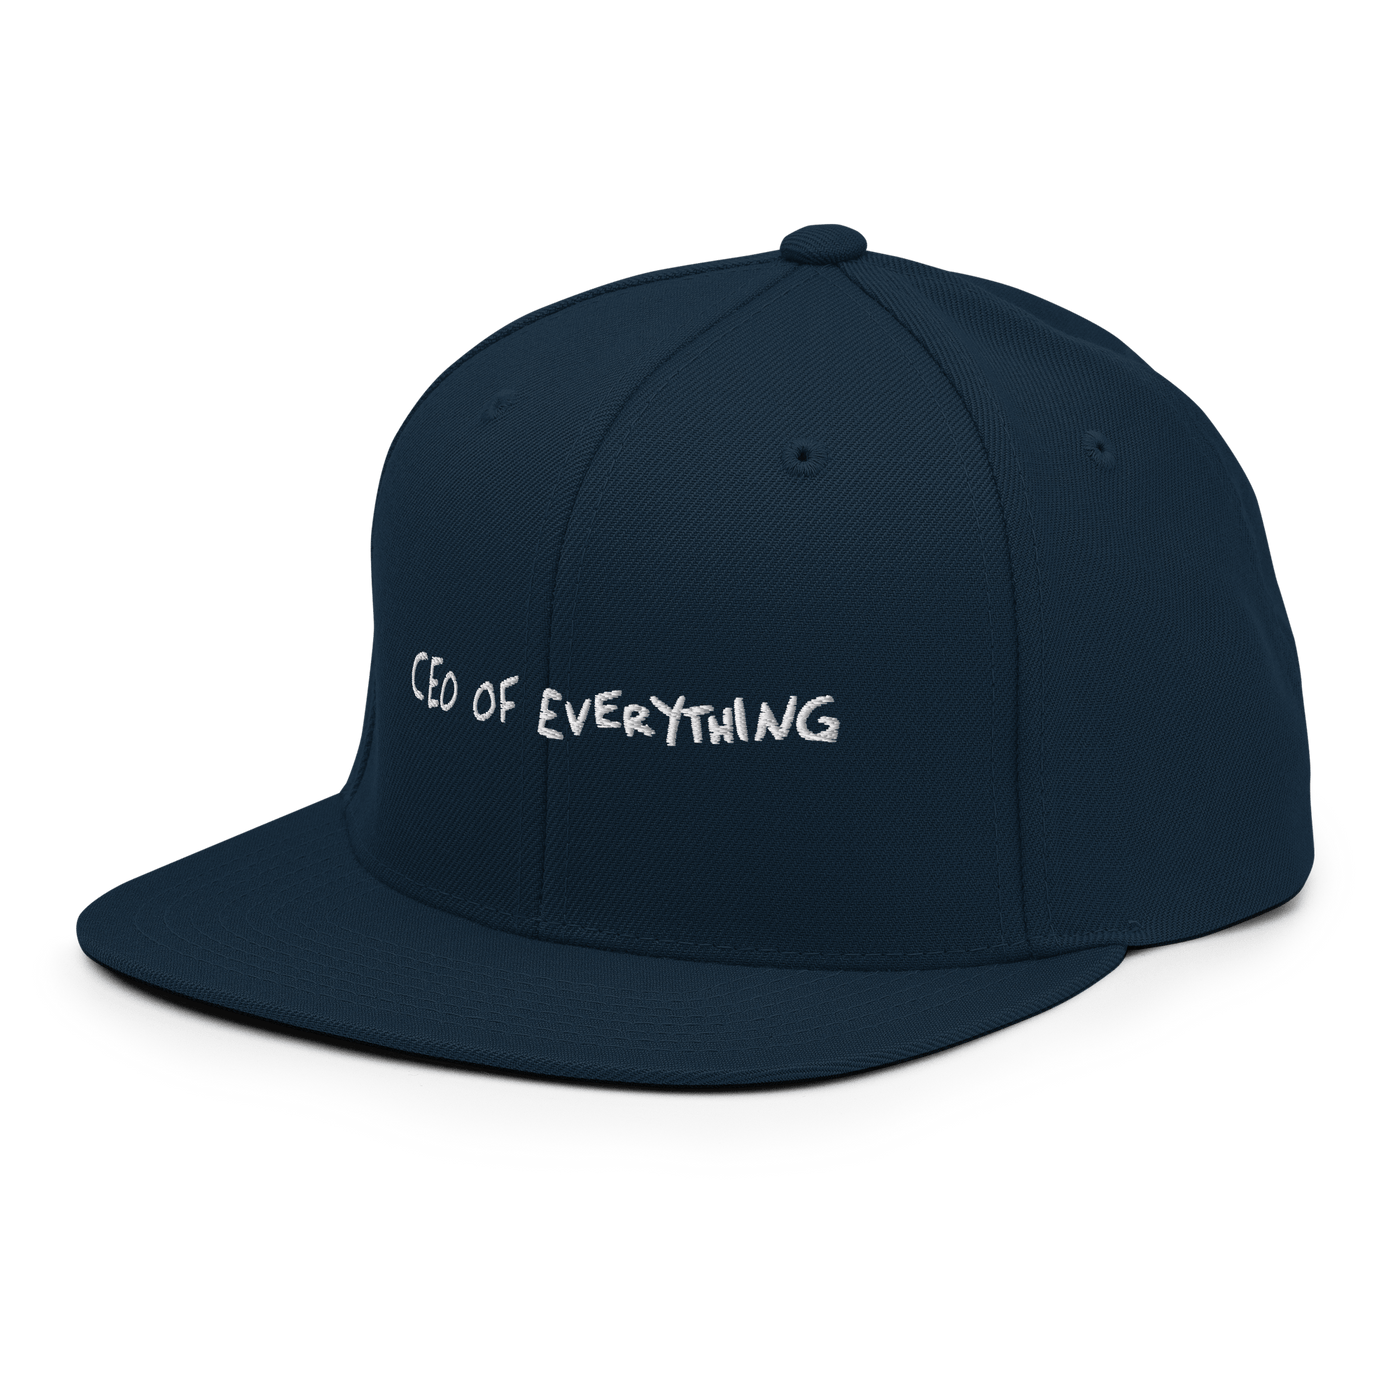 CEO of everything Snapback - Dark Navy - - Just Another Cap Store